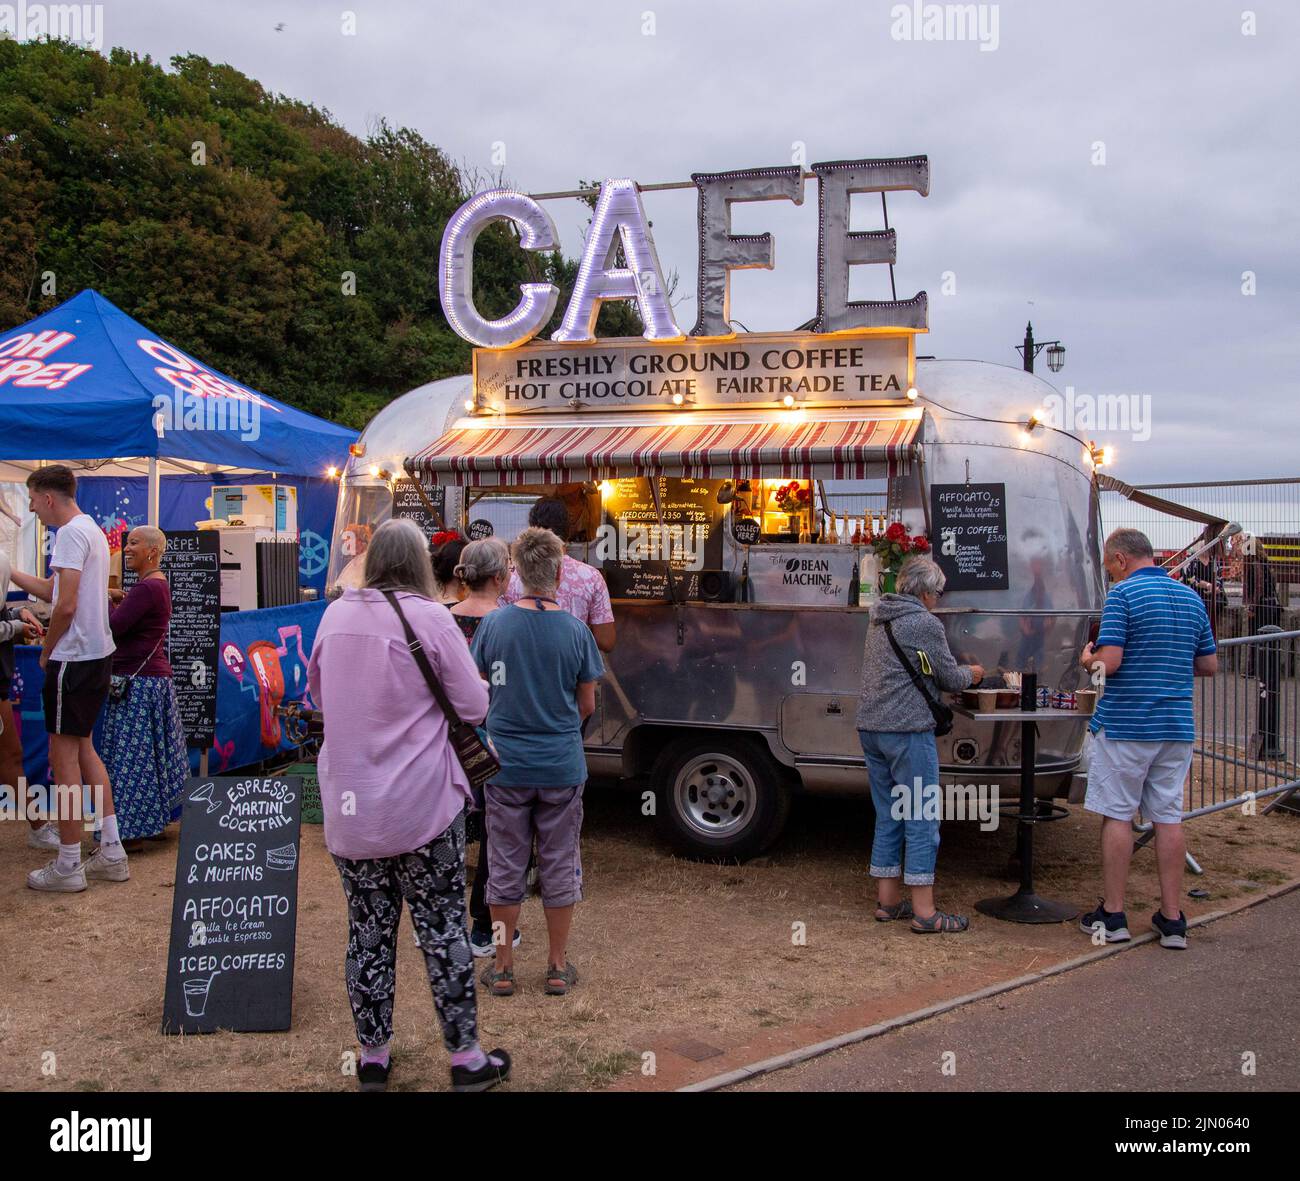 Pop up cafe caravan with broken illuminated sign. Outdoor eating and coffee, festival stall. Cafe sign.coffee Stock Photo